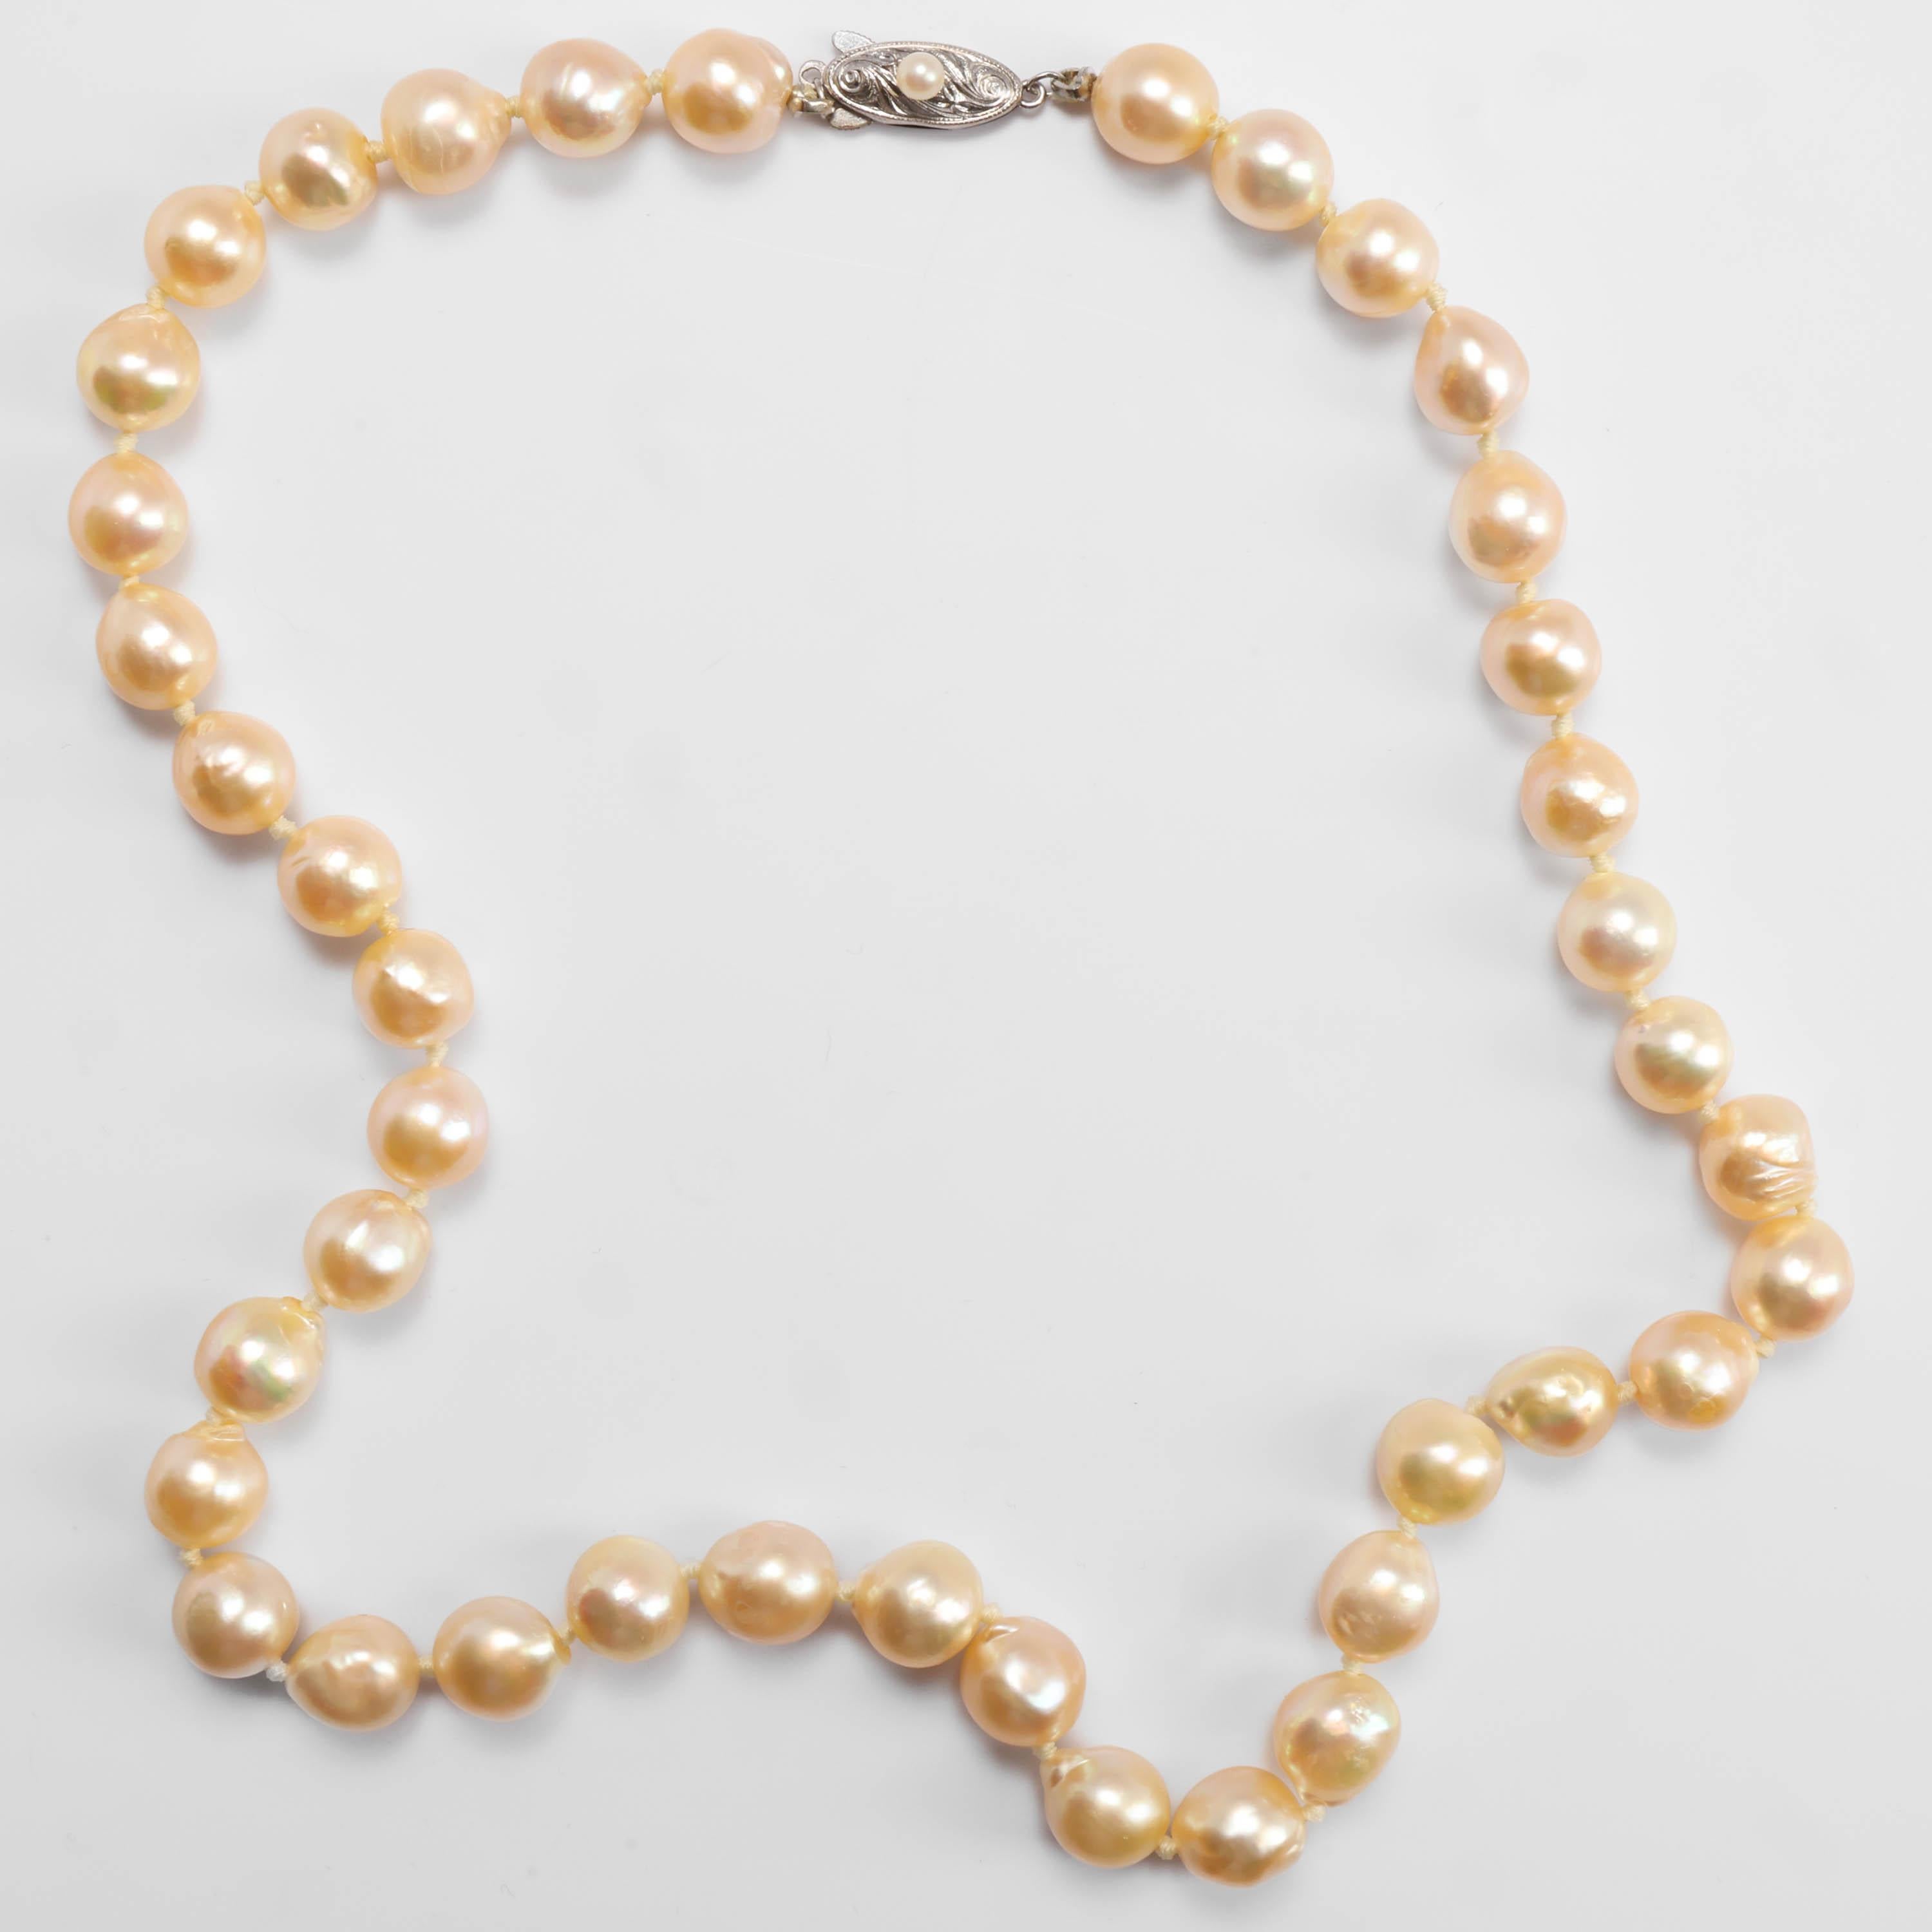 Women's South Sea Pearl Necklace Vers. 1.0